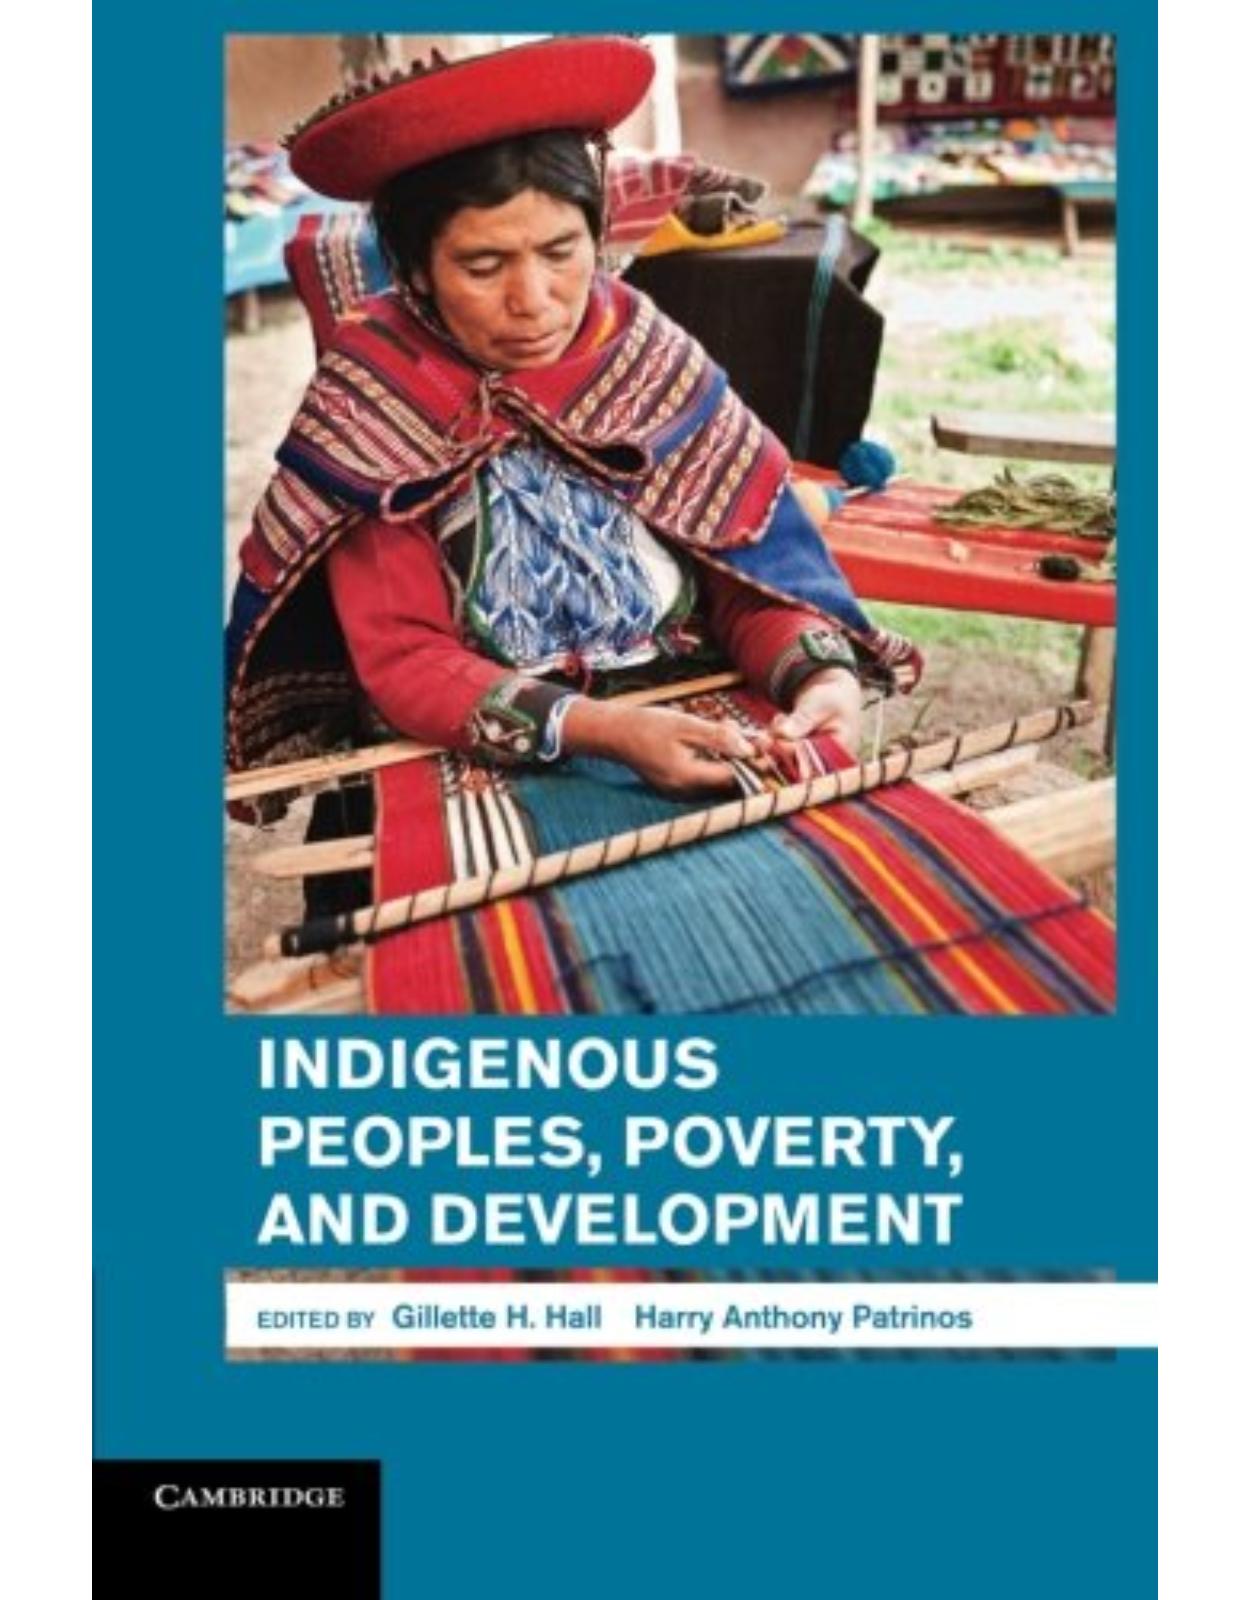 Indigenous Peoples, Poverty, and Development